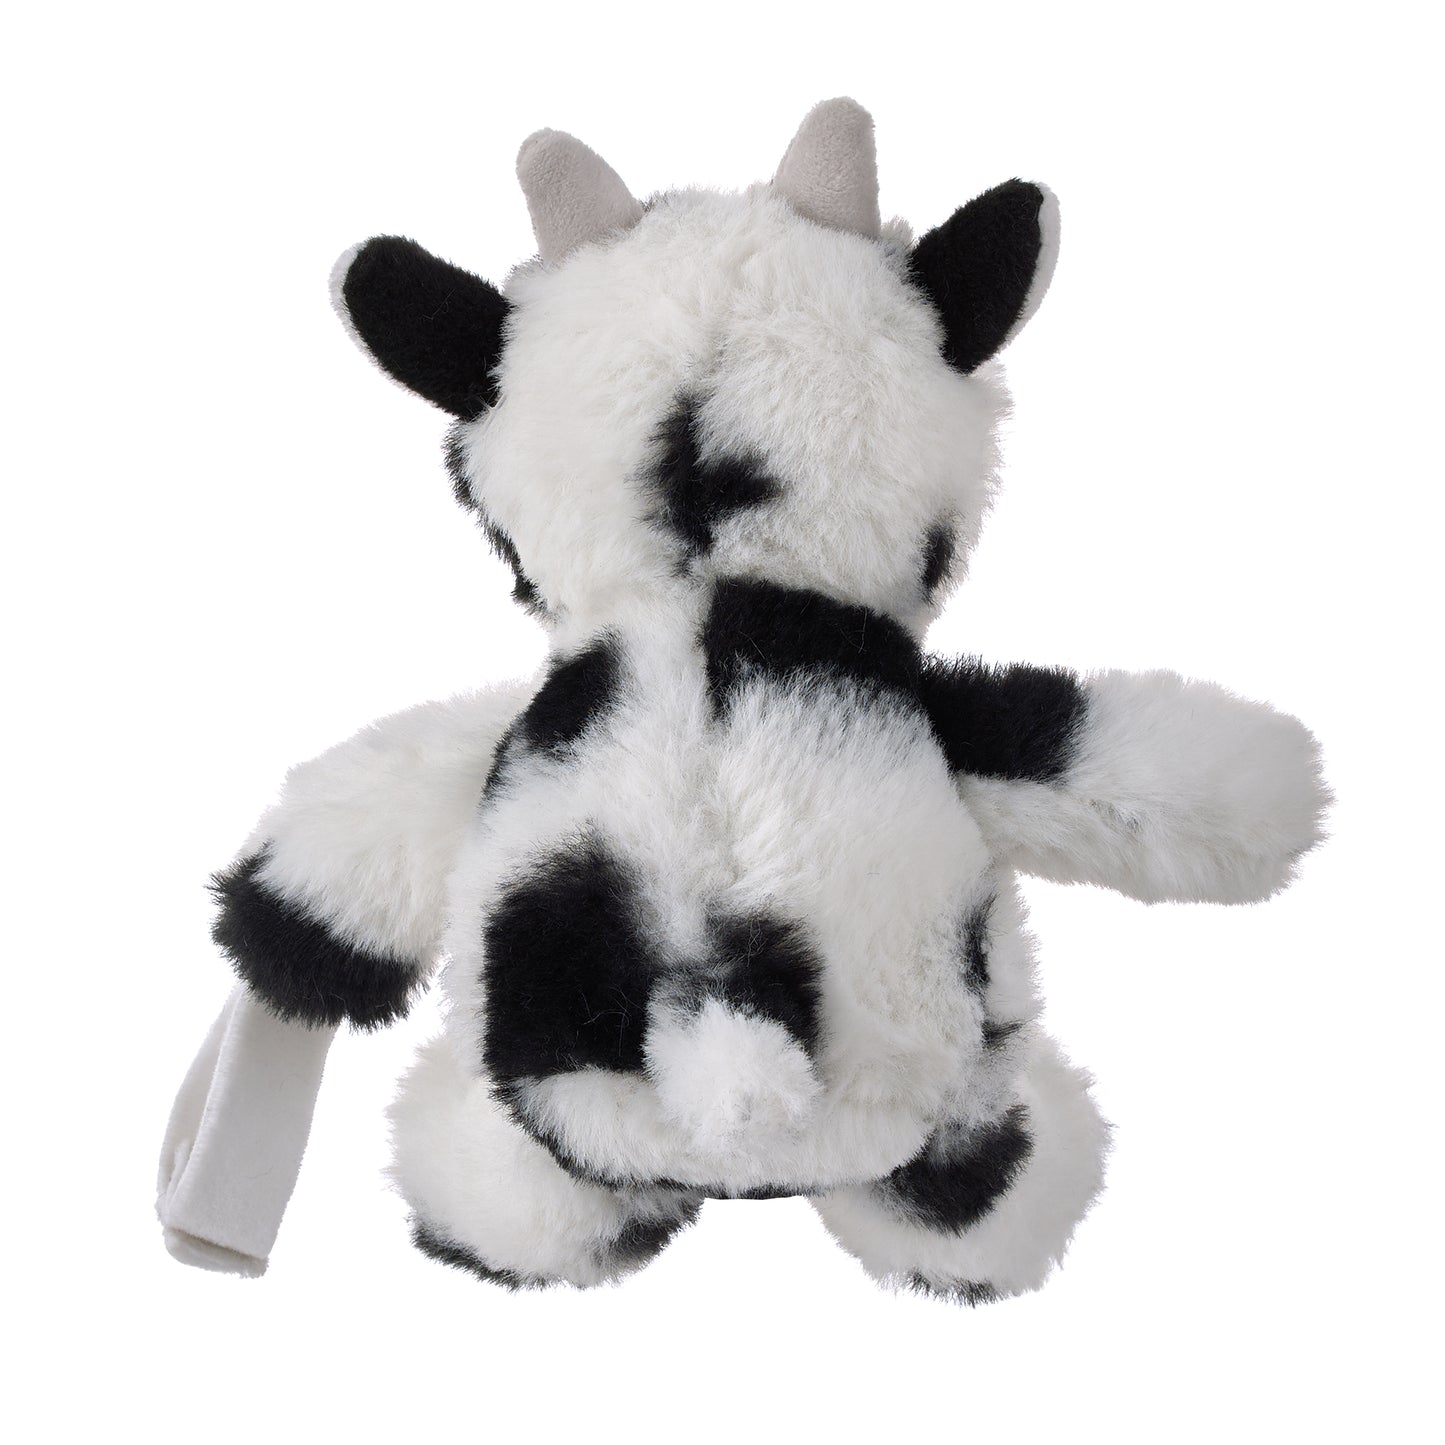 Little Love by NoJo Cow Shaped Black and White Plush Pacifier Buddy